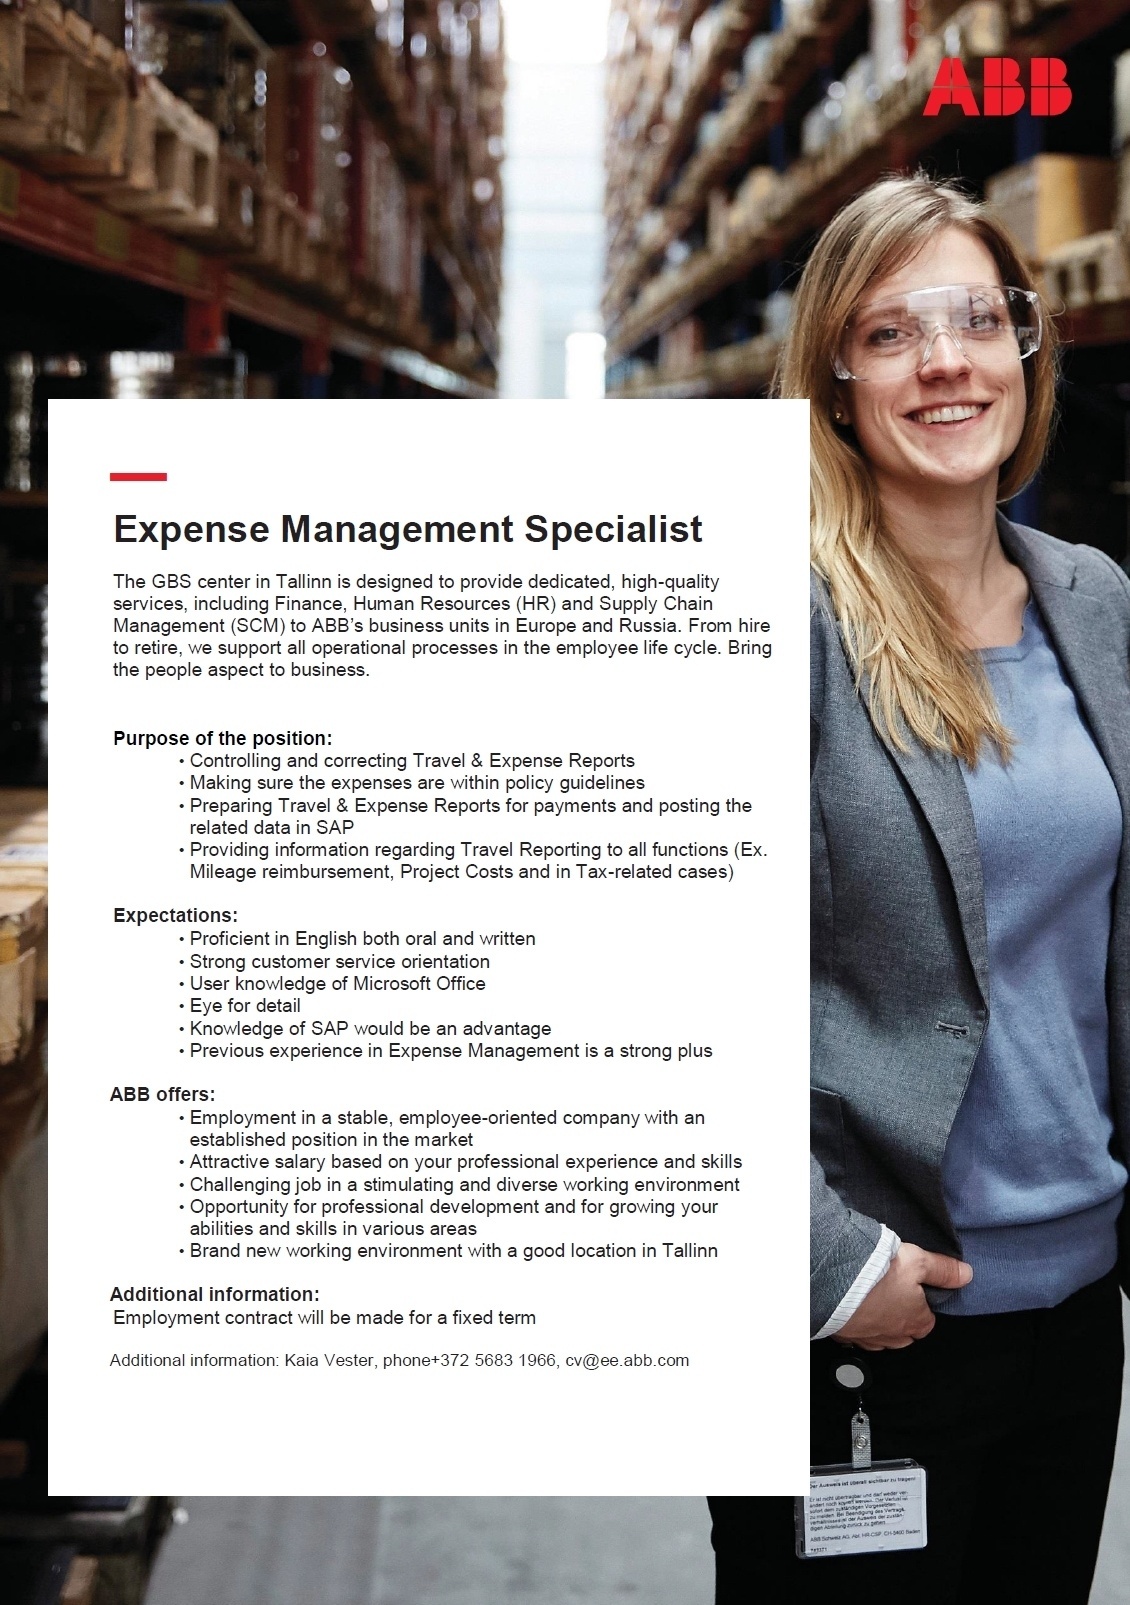 ABB AS Expense Management Specialist